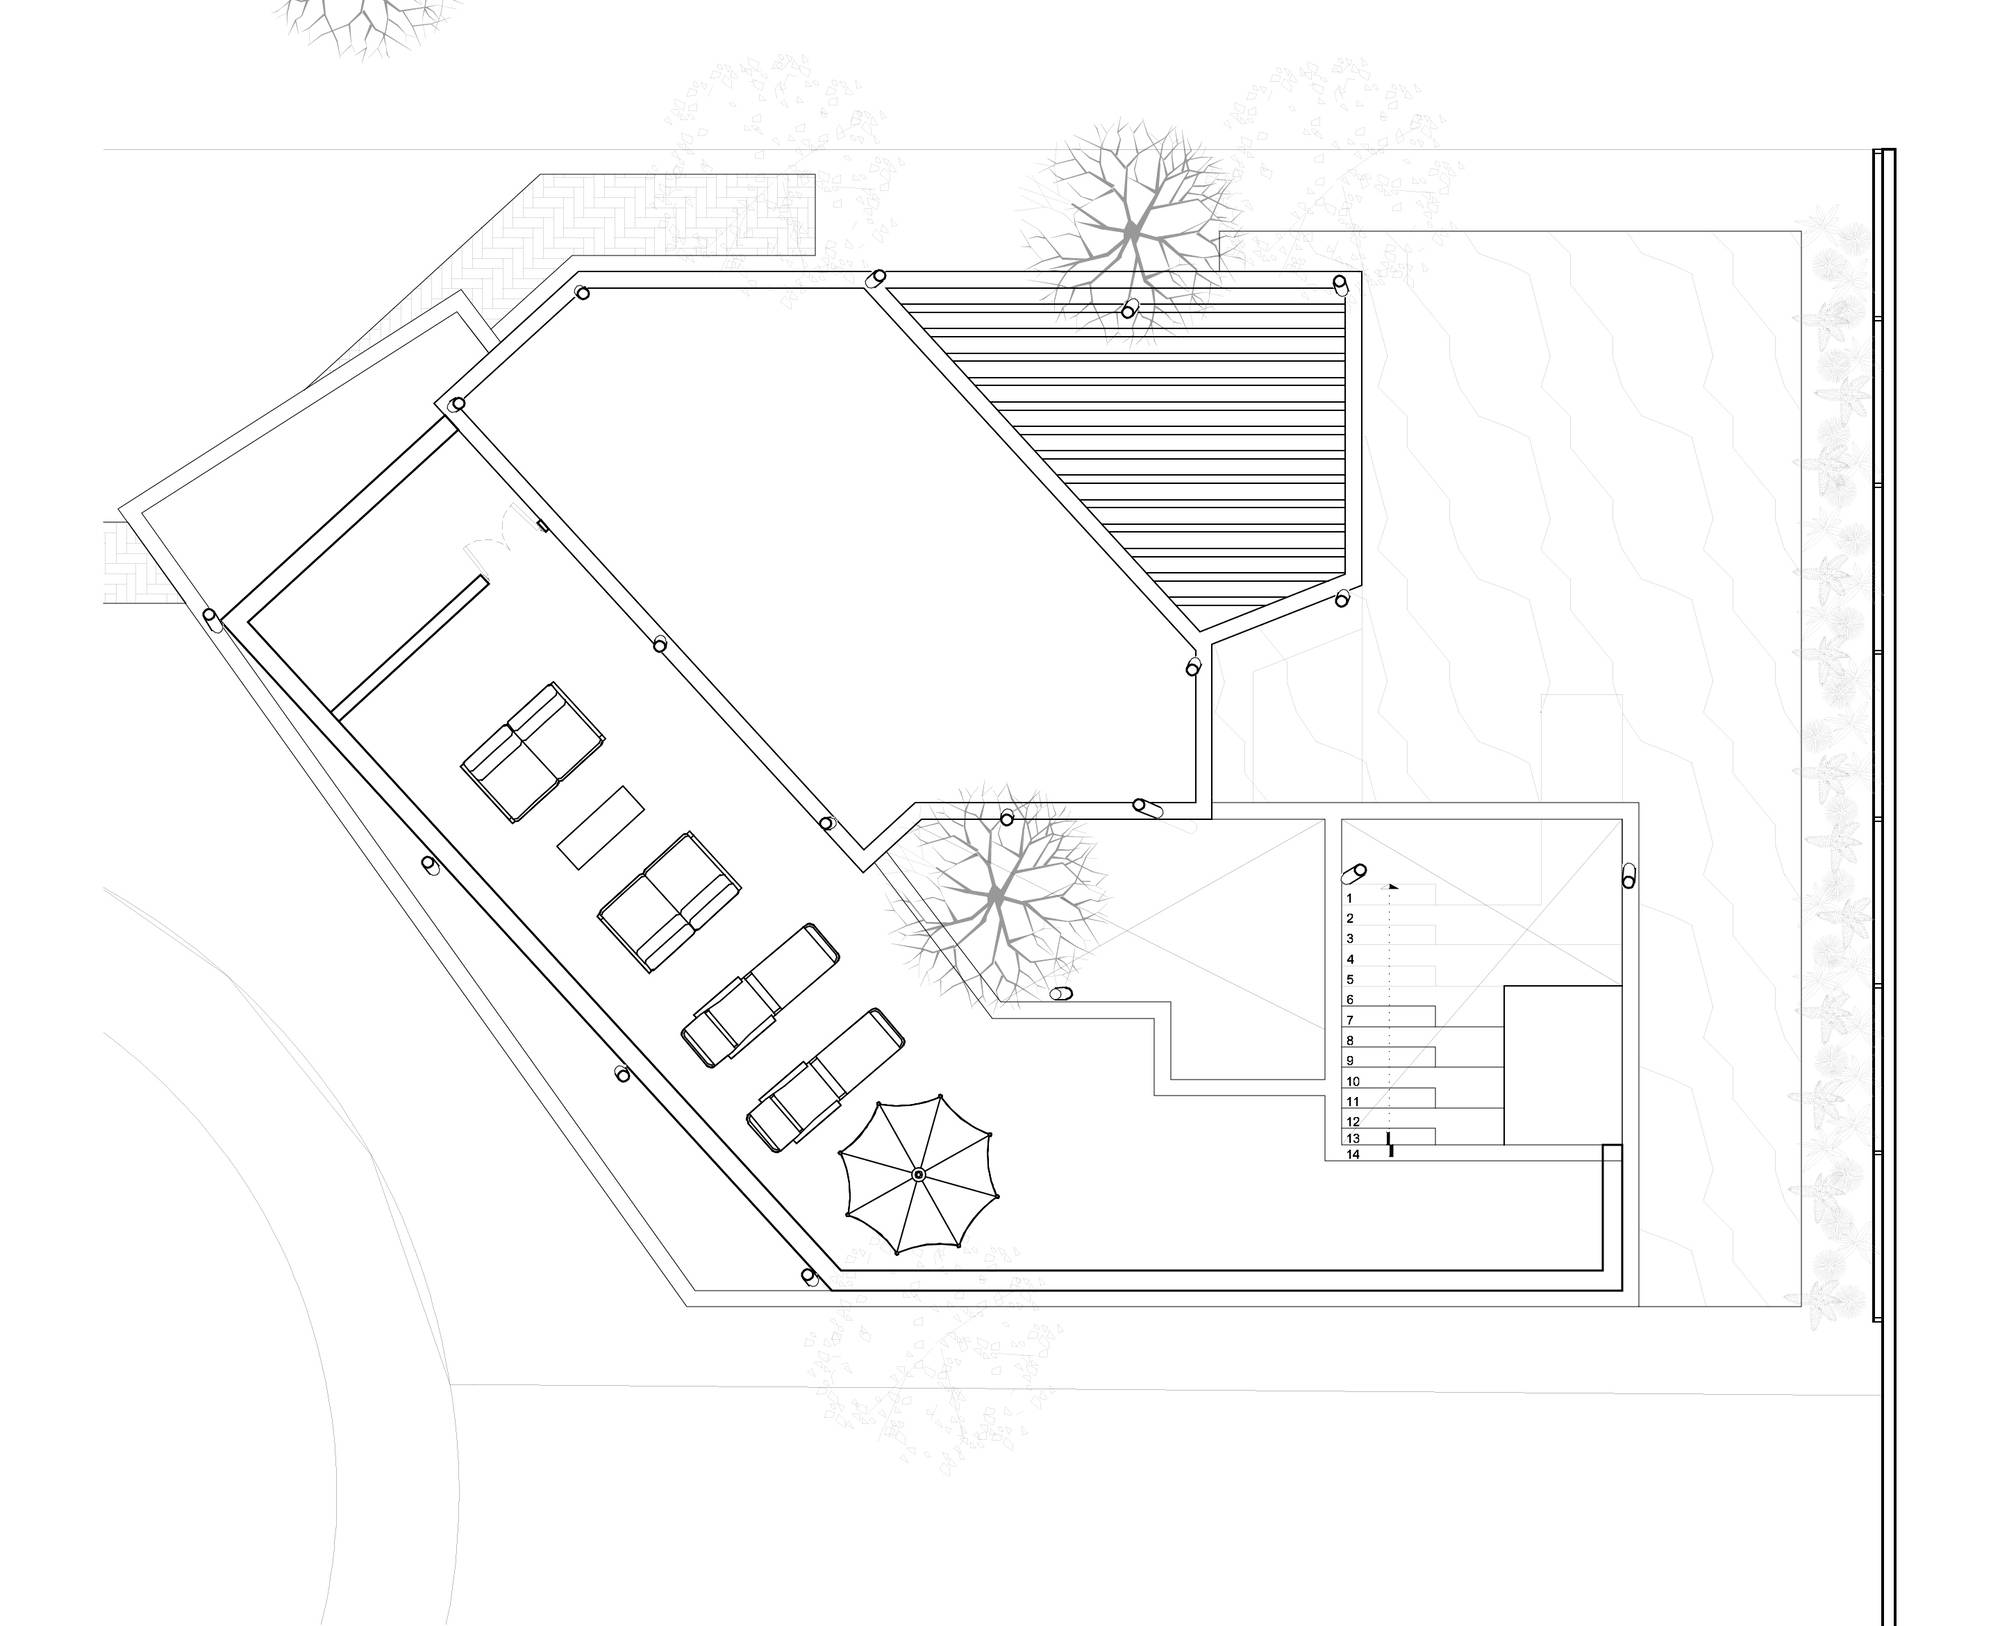 Upper level floor plan of Barrenechea House Extension designed by Cafeina Design in Santa Cruc, Bolivia